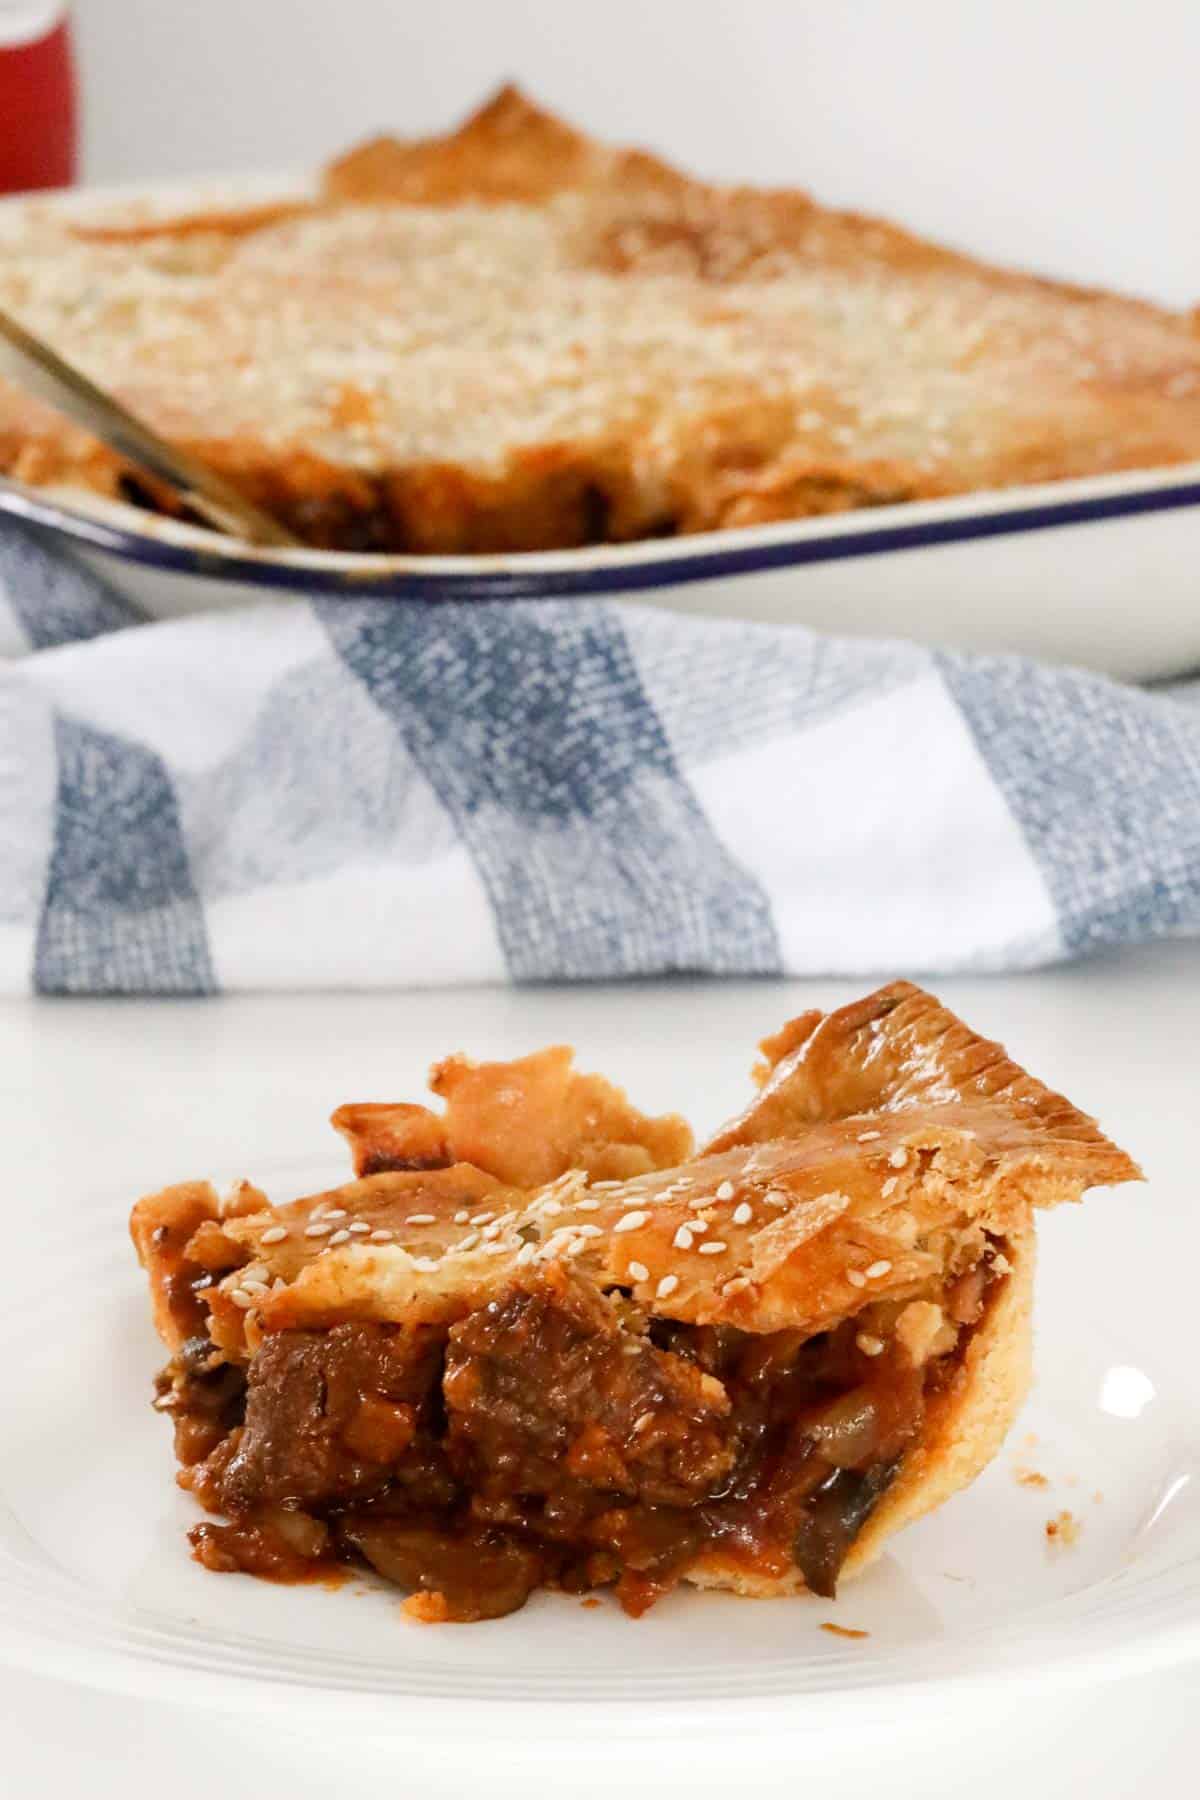 A serve of steak and mushroom pie with chunks of beef visible, on a white plate.